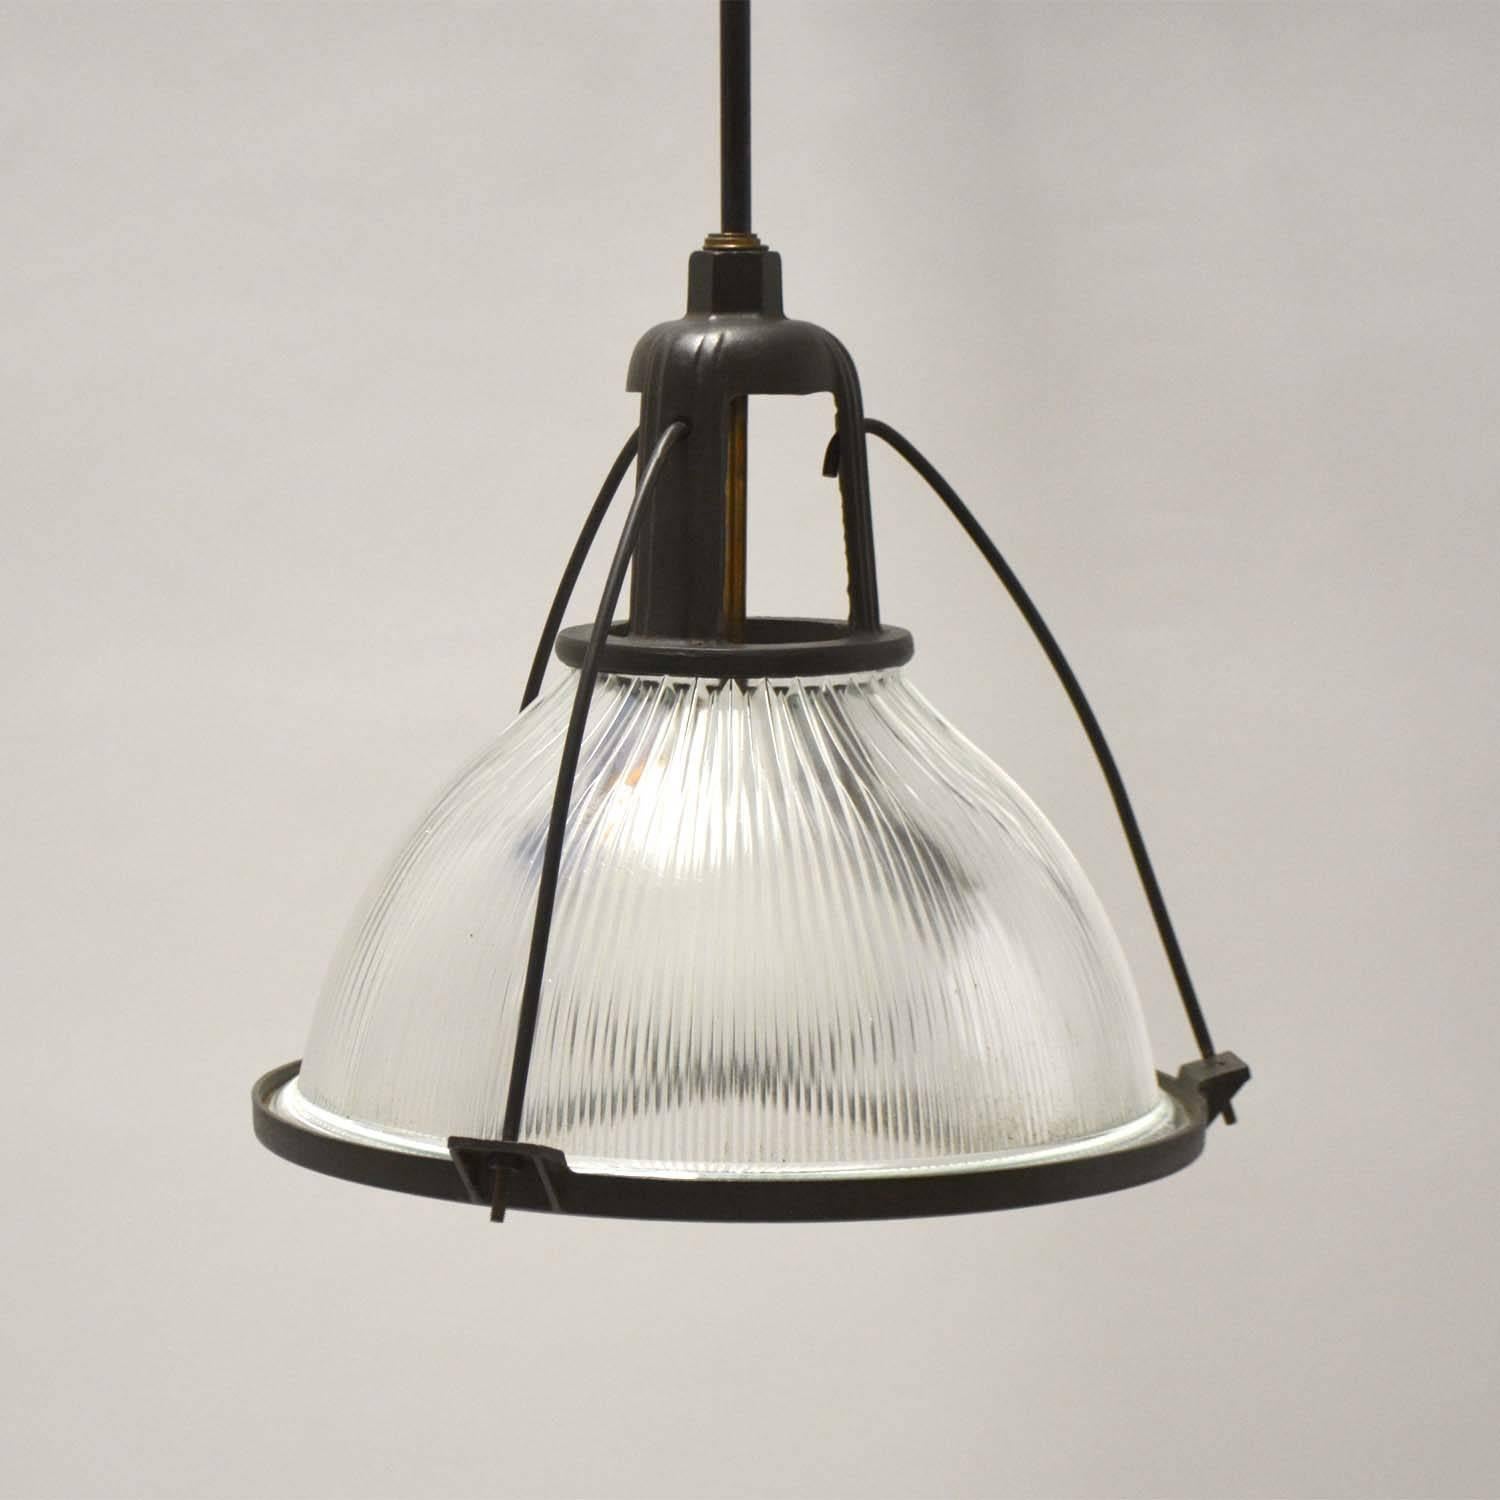 Three vintage industrial holophane pendants, with original Fresnel glass, refurbished with a dark burnished bronze finish.
Priced individually.